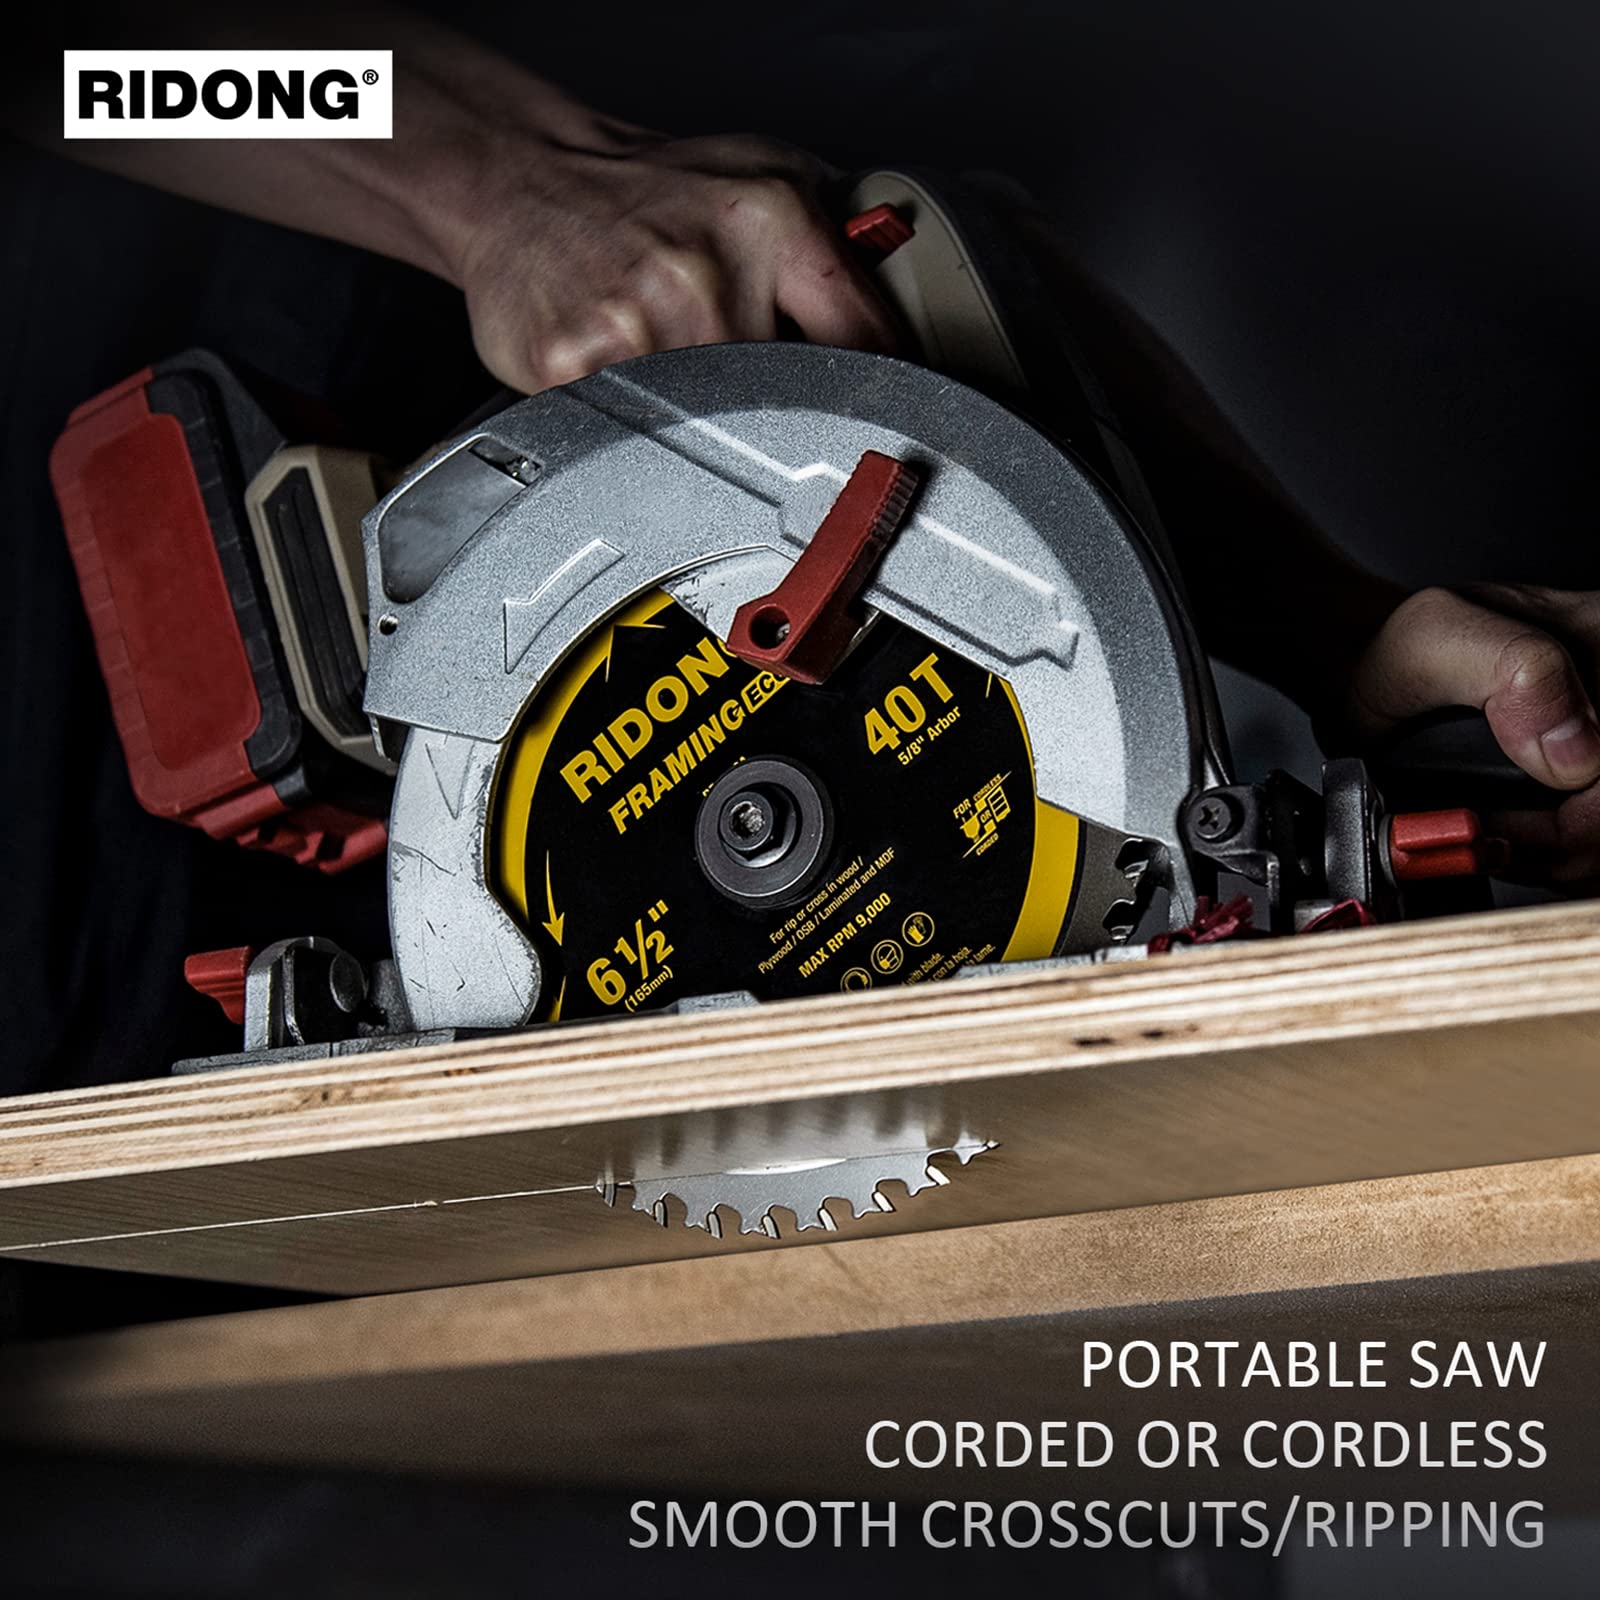 RIDONG 6-1/2 Inch 40 Tooth Circular Saw Blade with 5/8 Inch Arbor ATB Finishing for Wood Cutting(5-Packs)